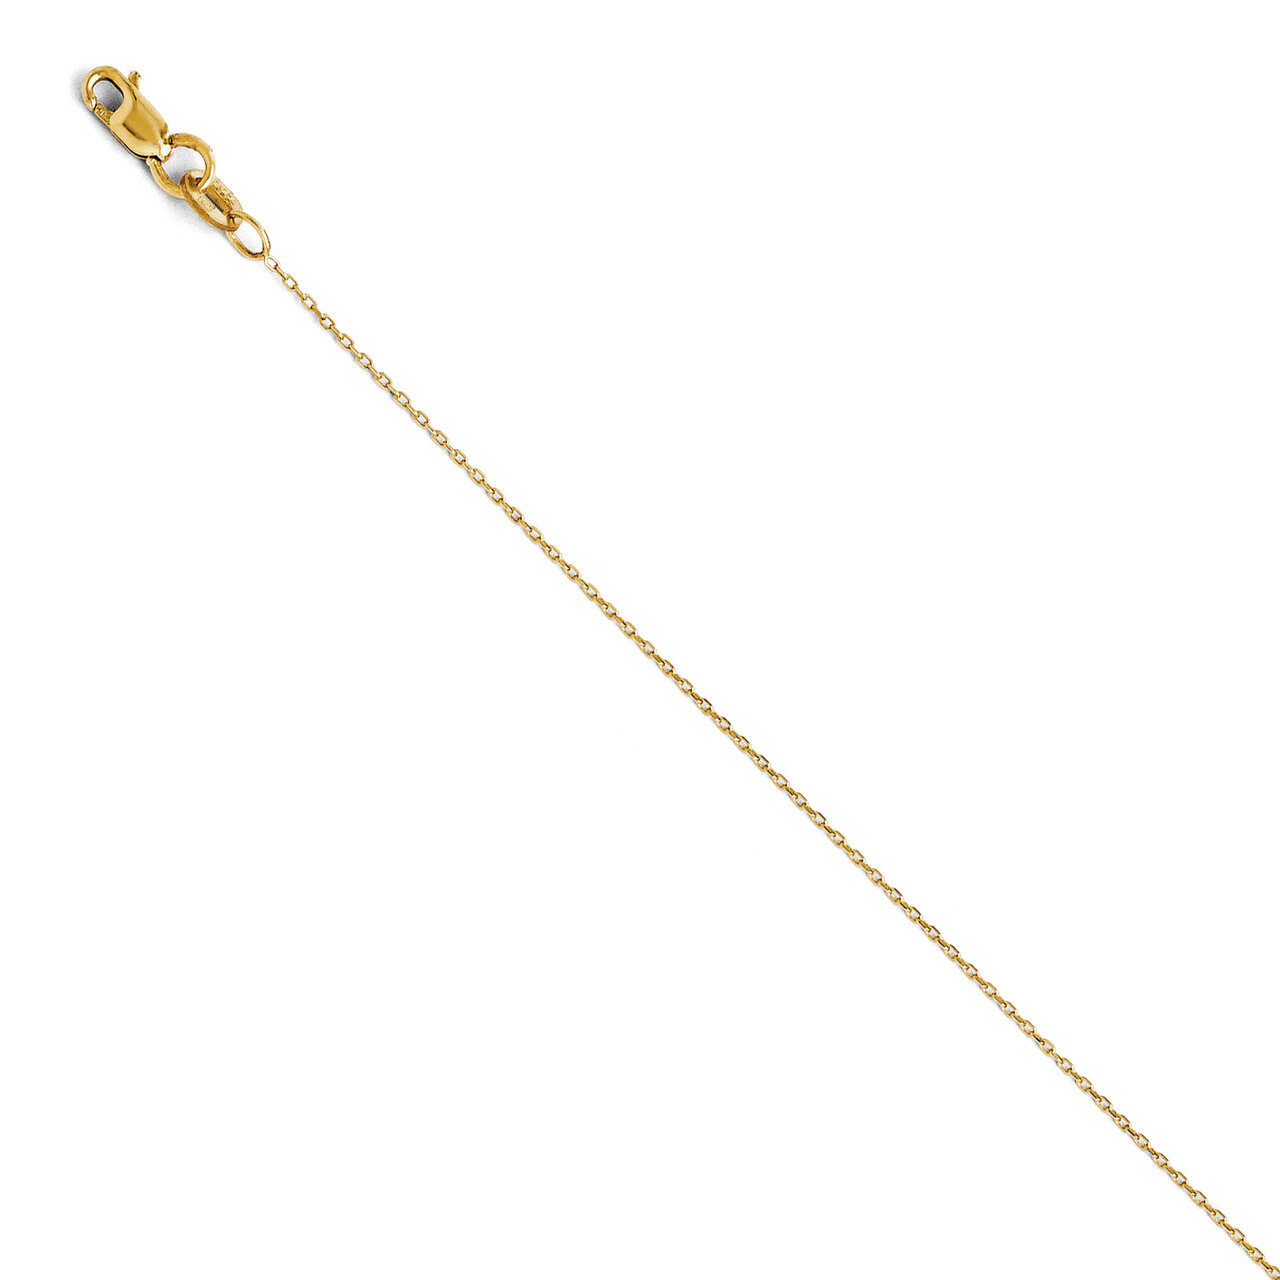 Round Cable Chain 18 Inch - 14k Gold HB-3054-18